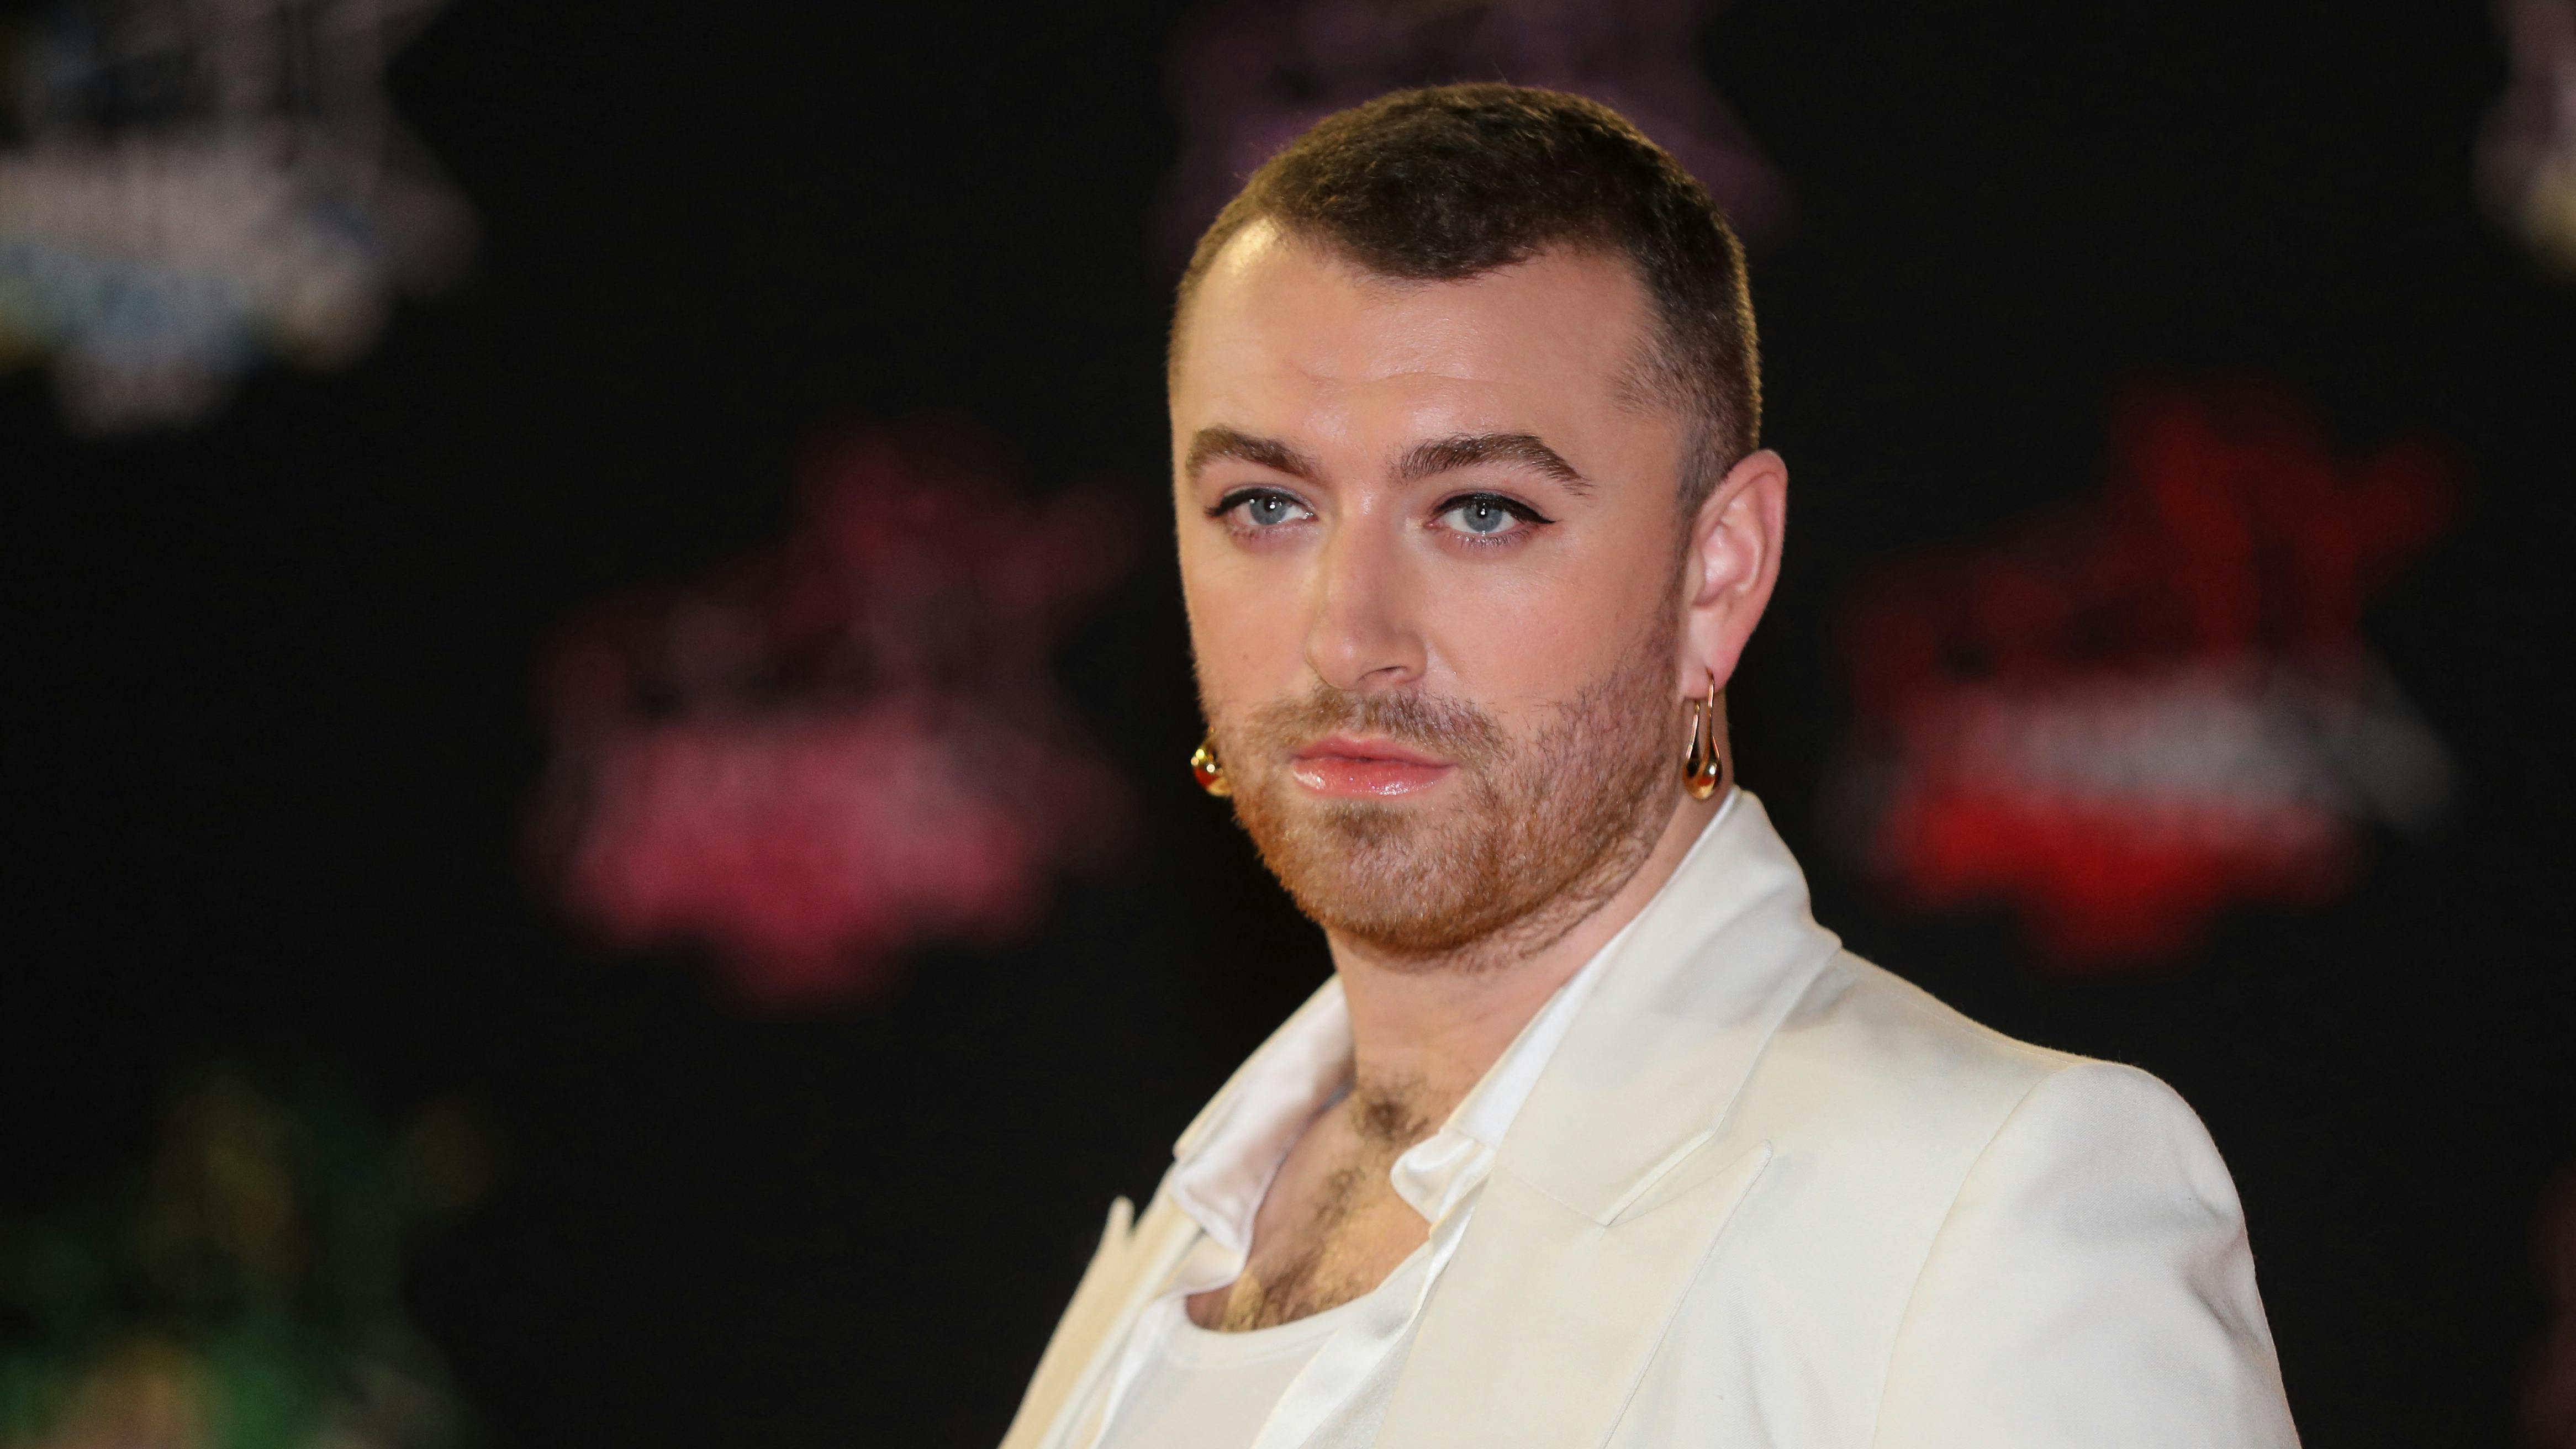 British singer Sam Smith poses on the red carpet as he arrives to attend the 21st NRJ Music Awards ceremony at the Palais des Festivals in Cannes, southeastern France, on November 9, 2019. Valery HACHE / AFP